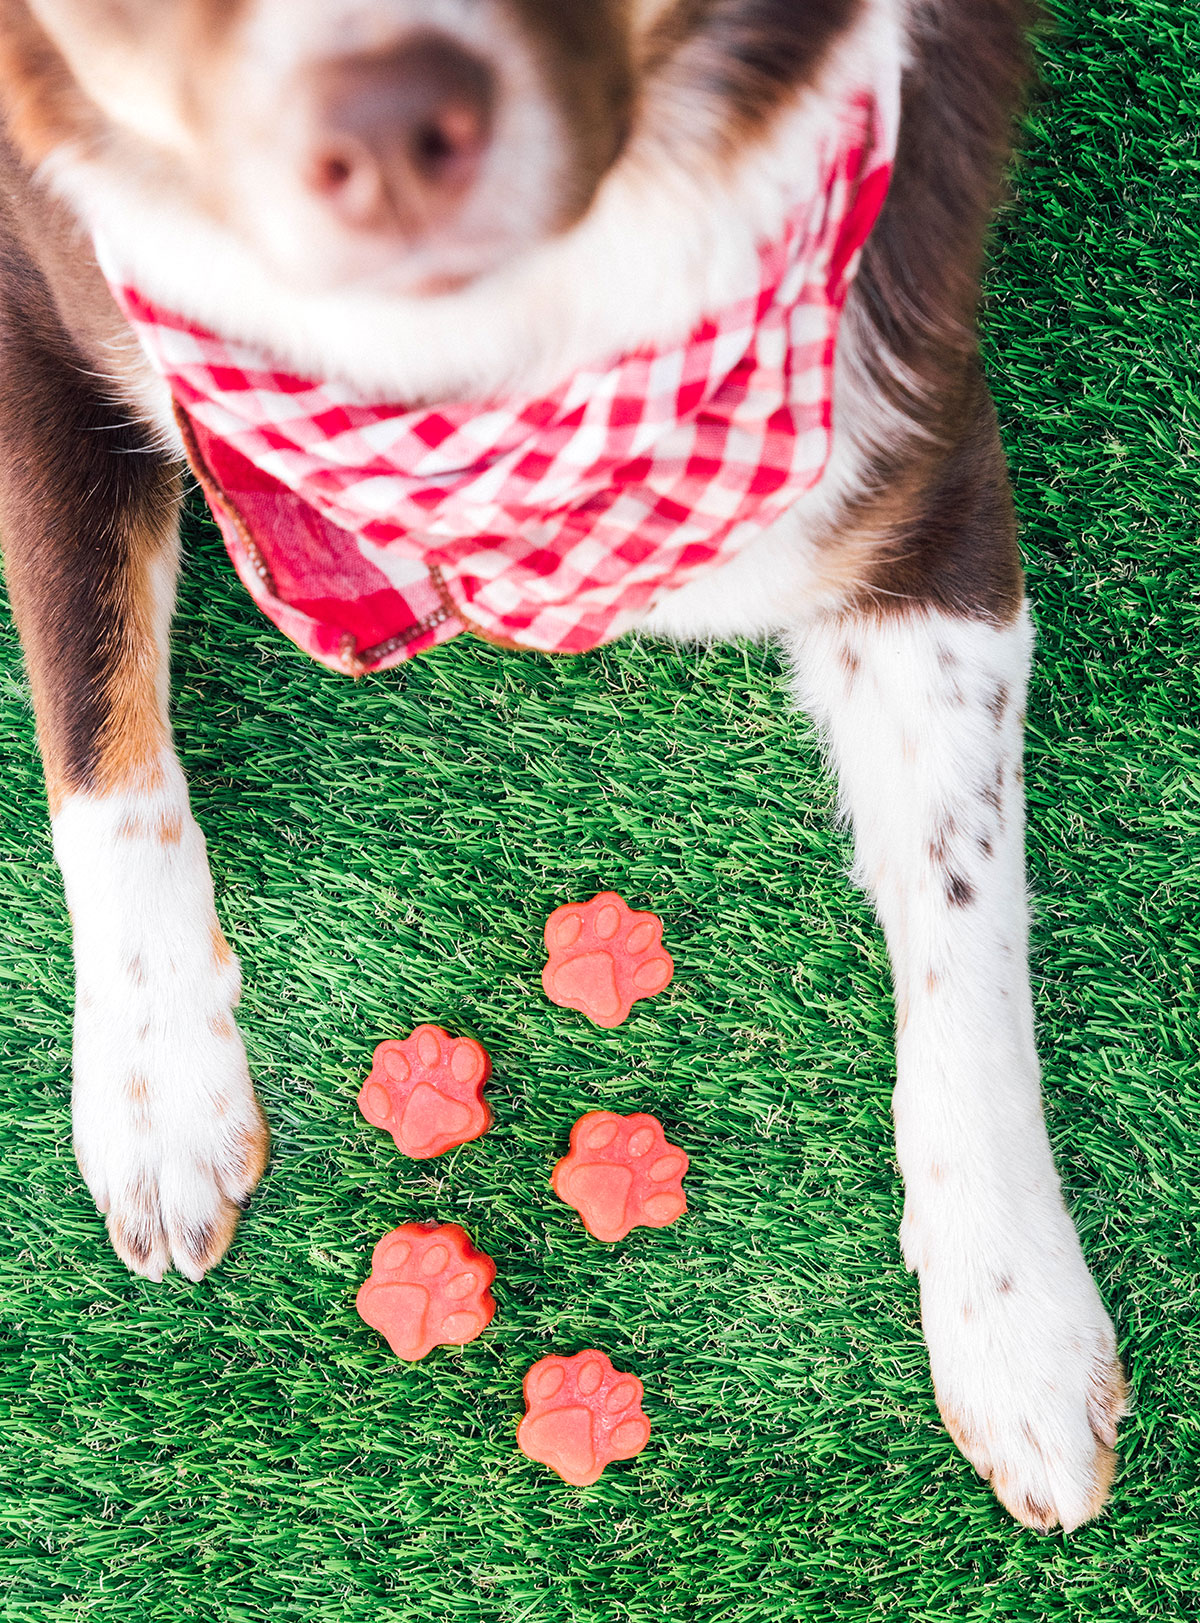 Dogs paws with five watermelon treats between them.